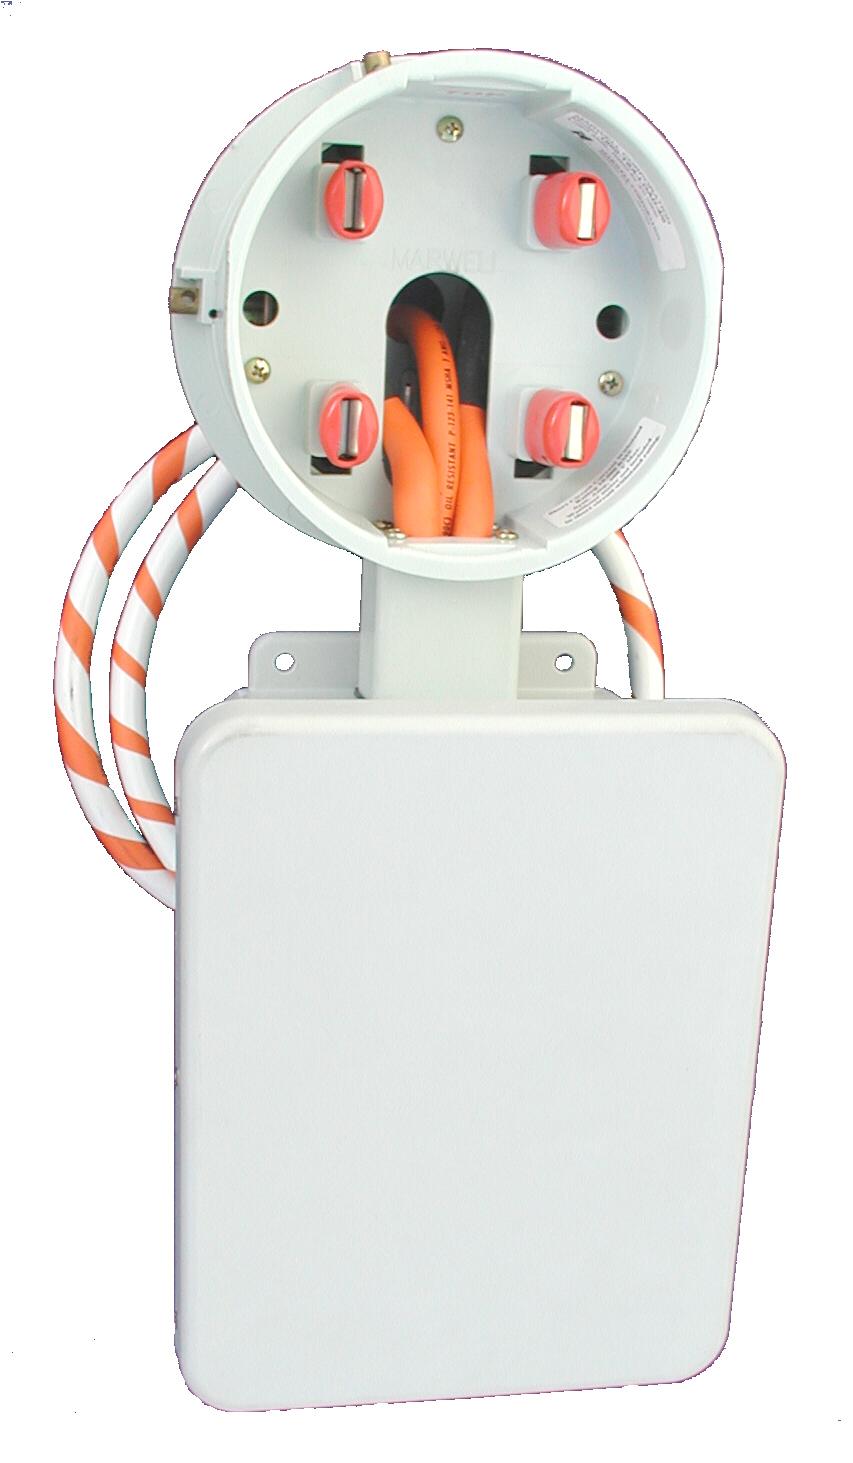 Temporary Service Adapter for 4/0 Cable Designed for one, two, or three cables - size 4/0 This special adapter will safely connect either one or two number 4/0 cables to the line side jaws of a meter